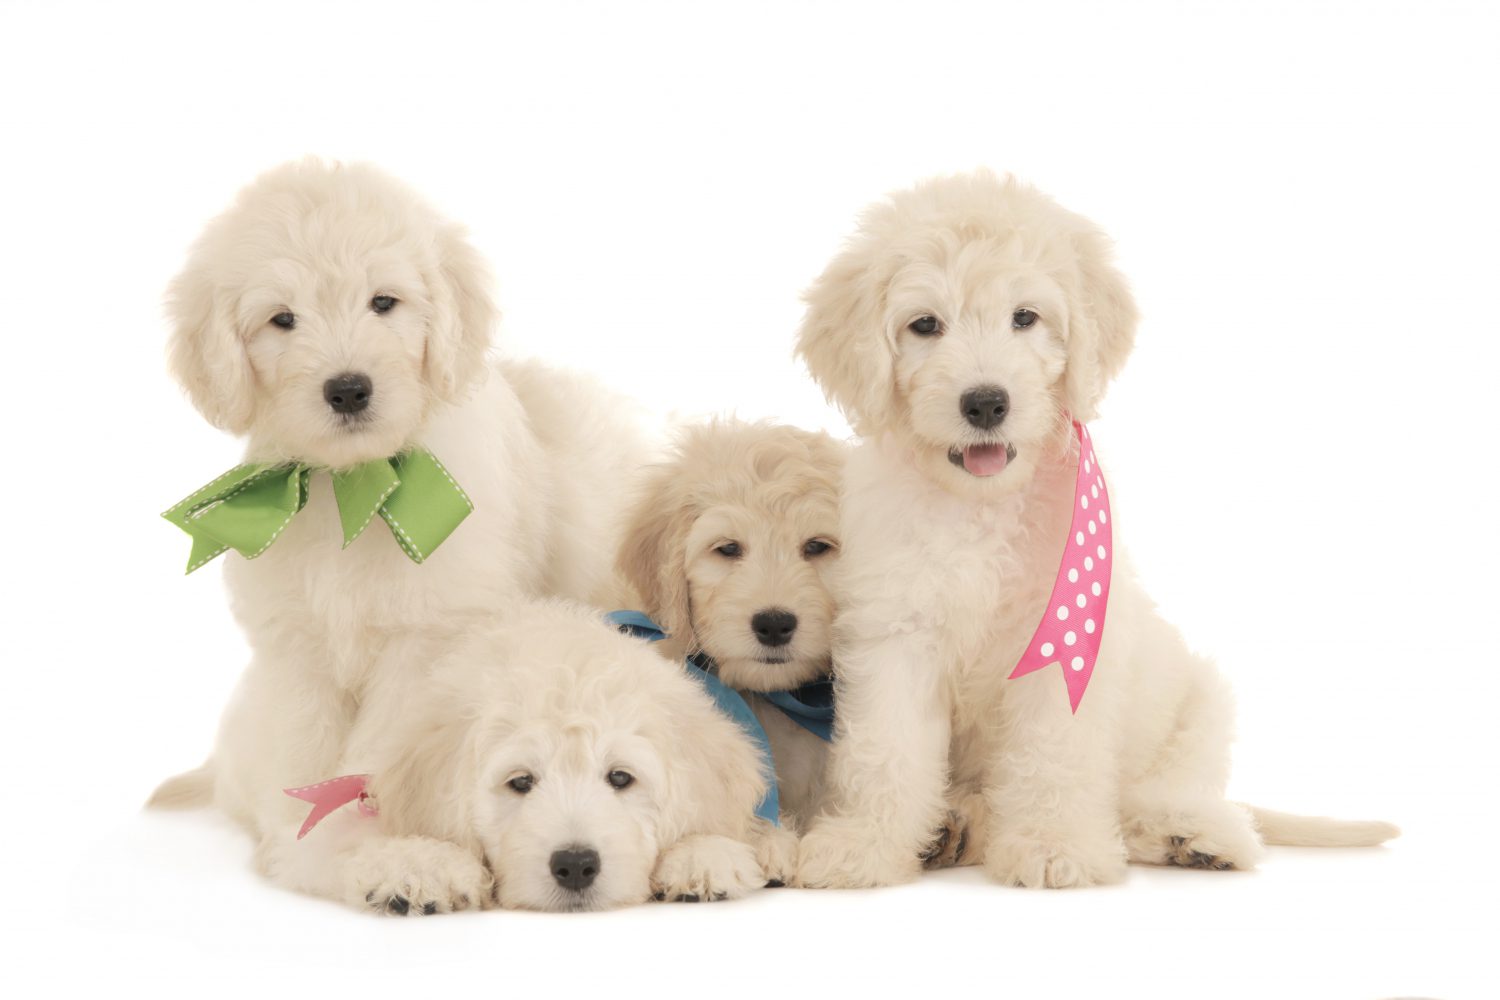 f1 large English teddybear goldendoodle puppies with ribbons on